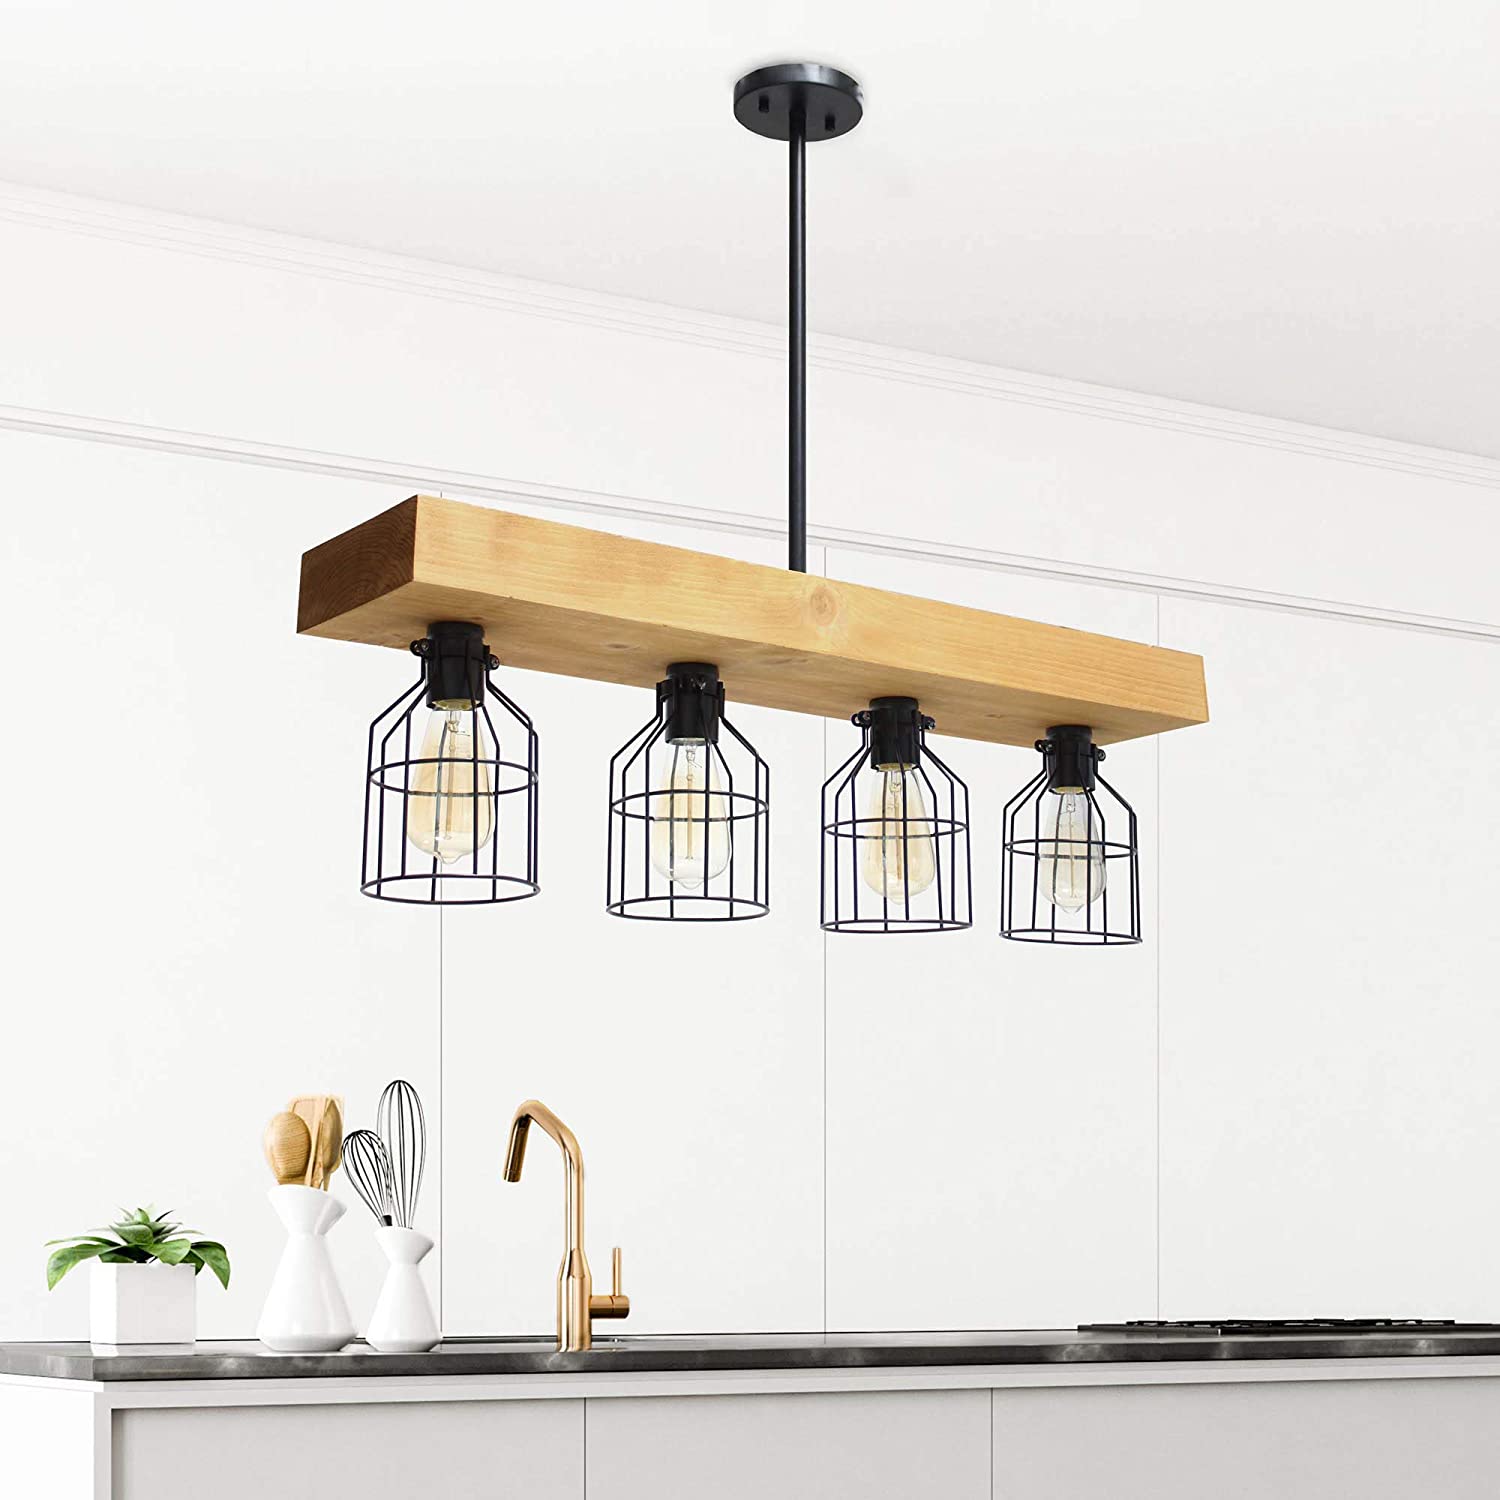 Lalia Home 4 Light Rustic Farmhouse Pendant with Light Wood Beam and Matte Black Metal Cage Shade